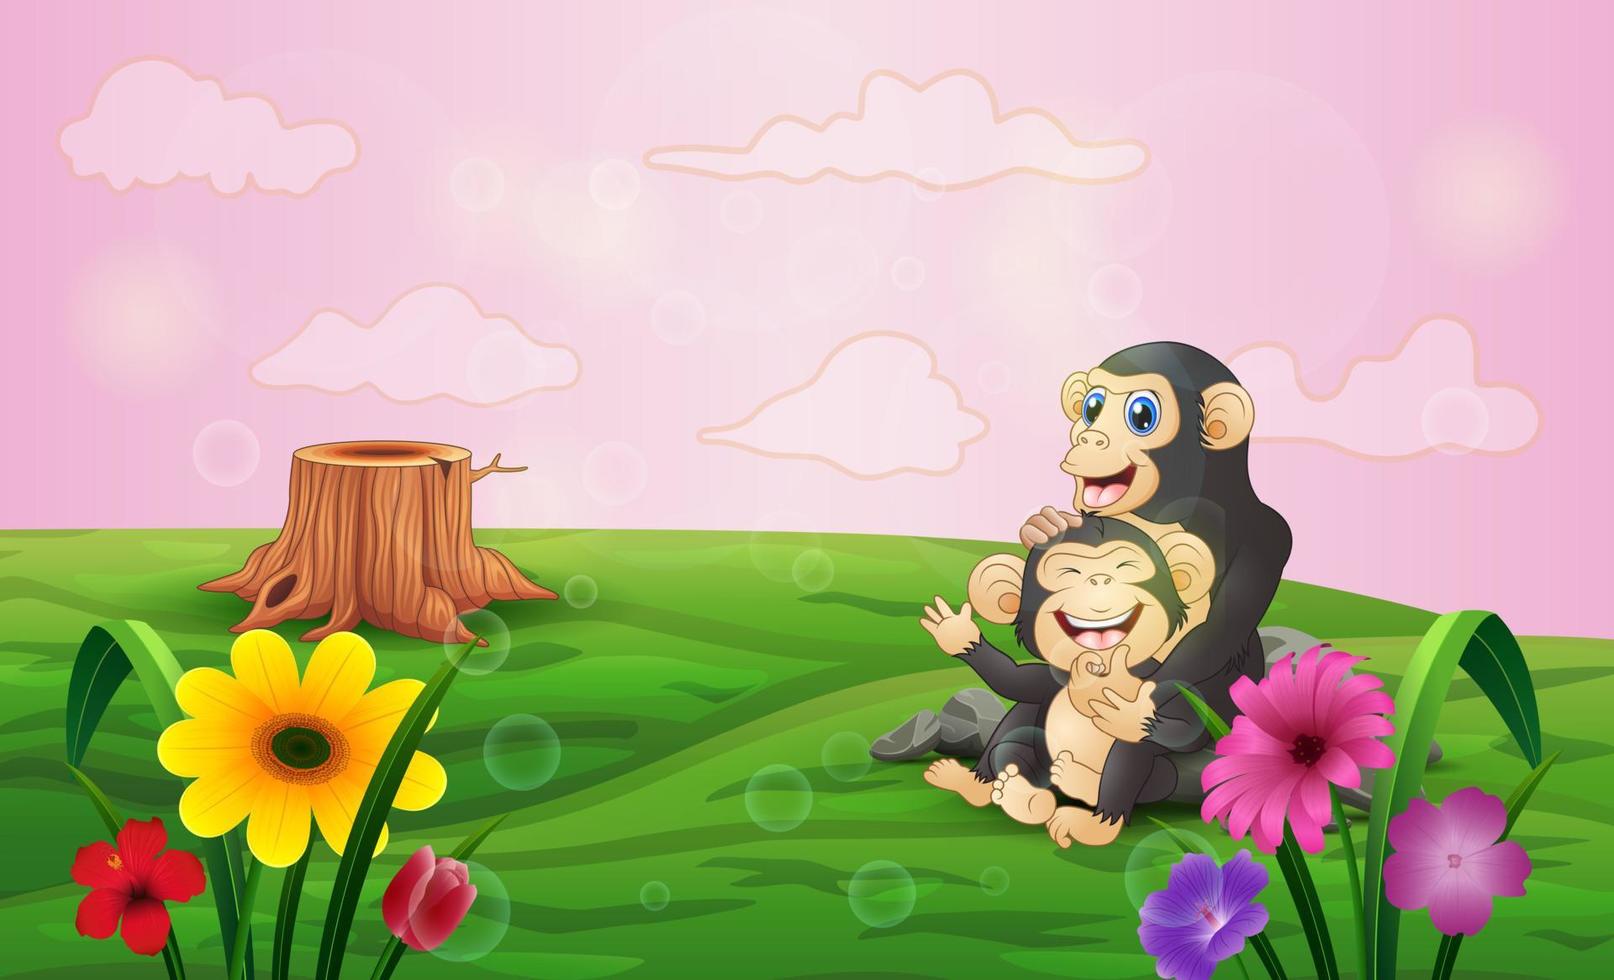 Funny chimpanzee with her cub sitting on green field vector